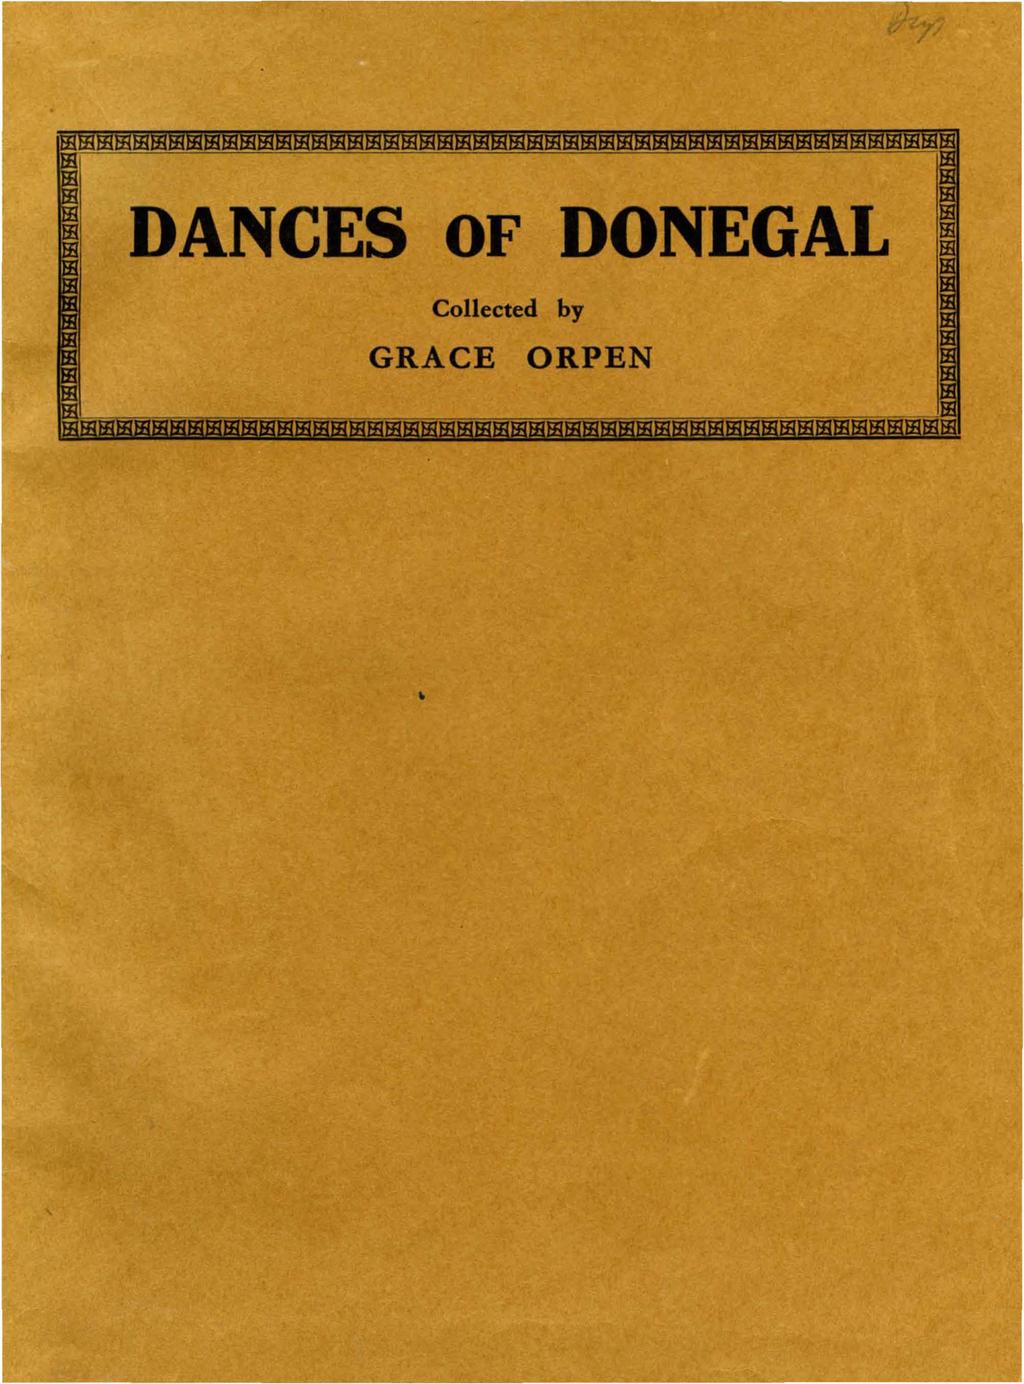 mm DANCES OF DONEGAL